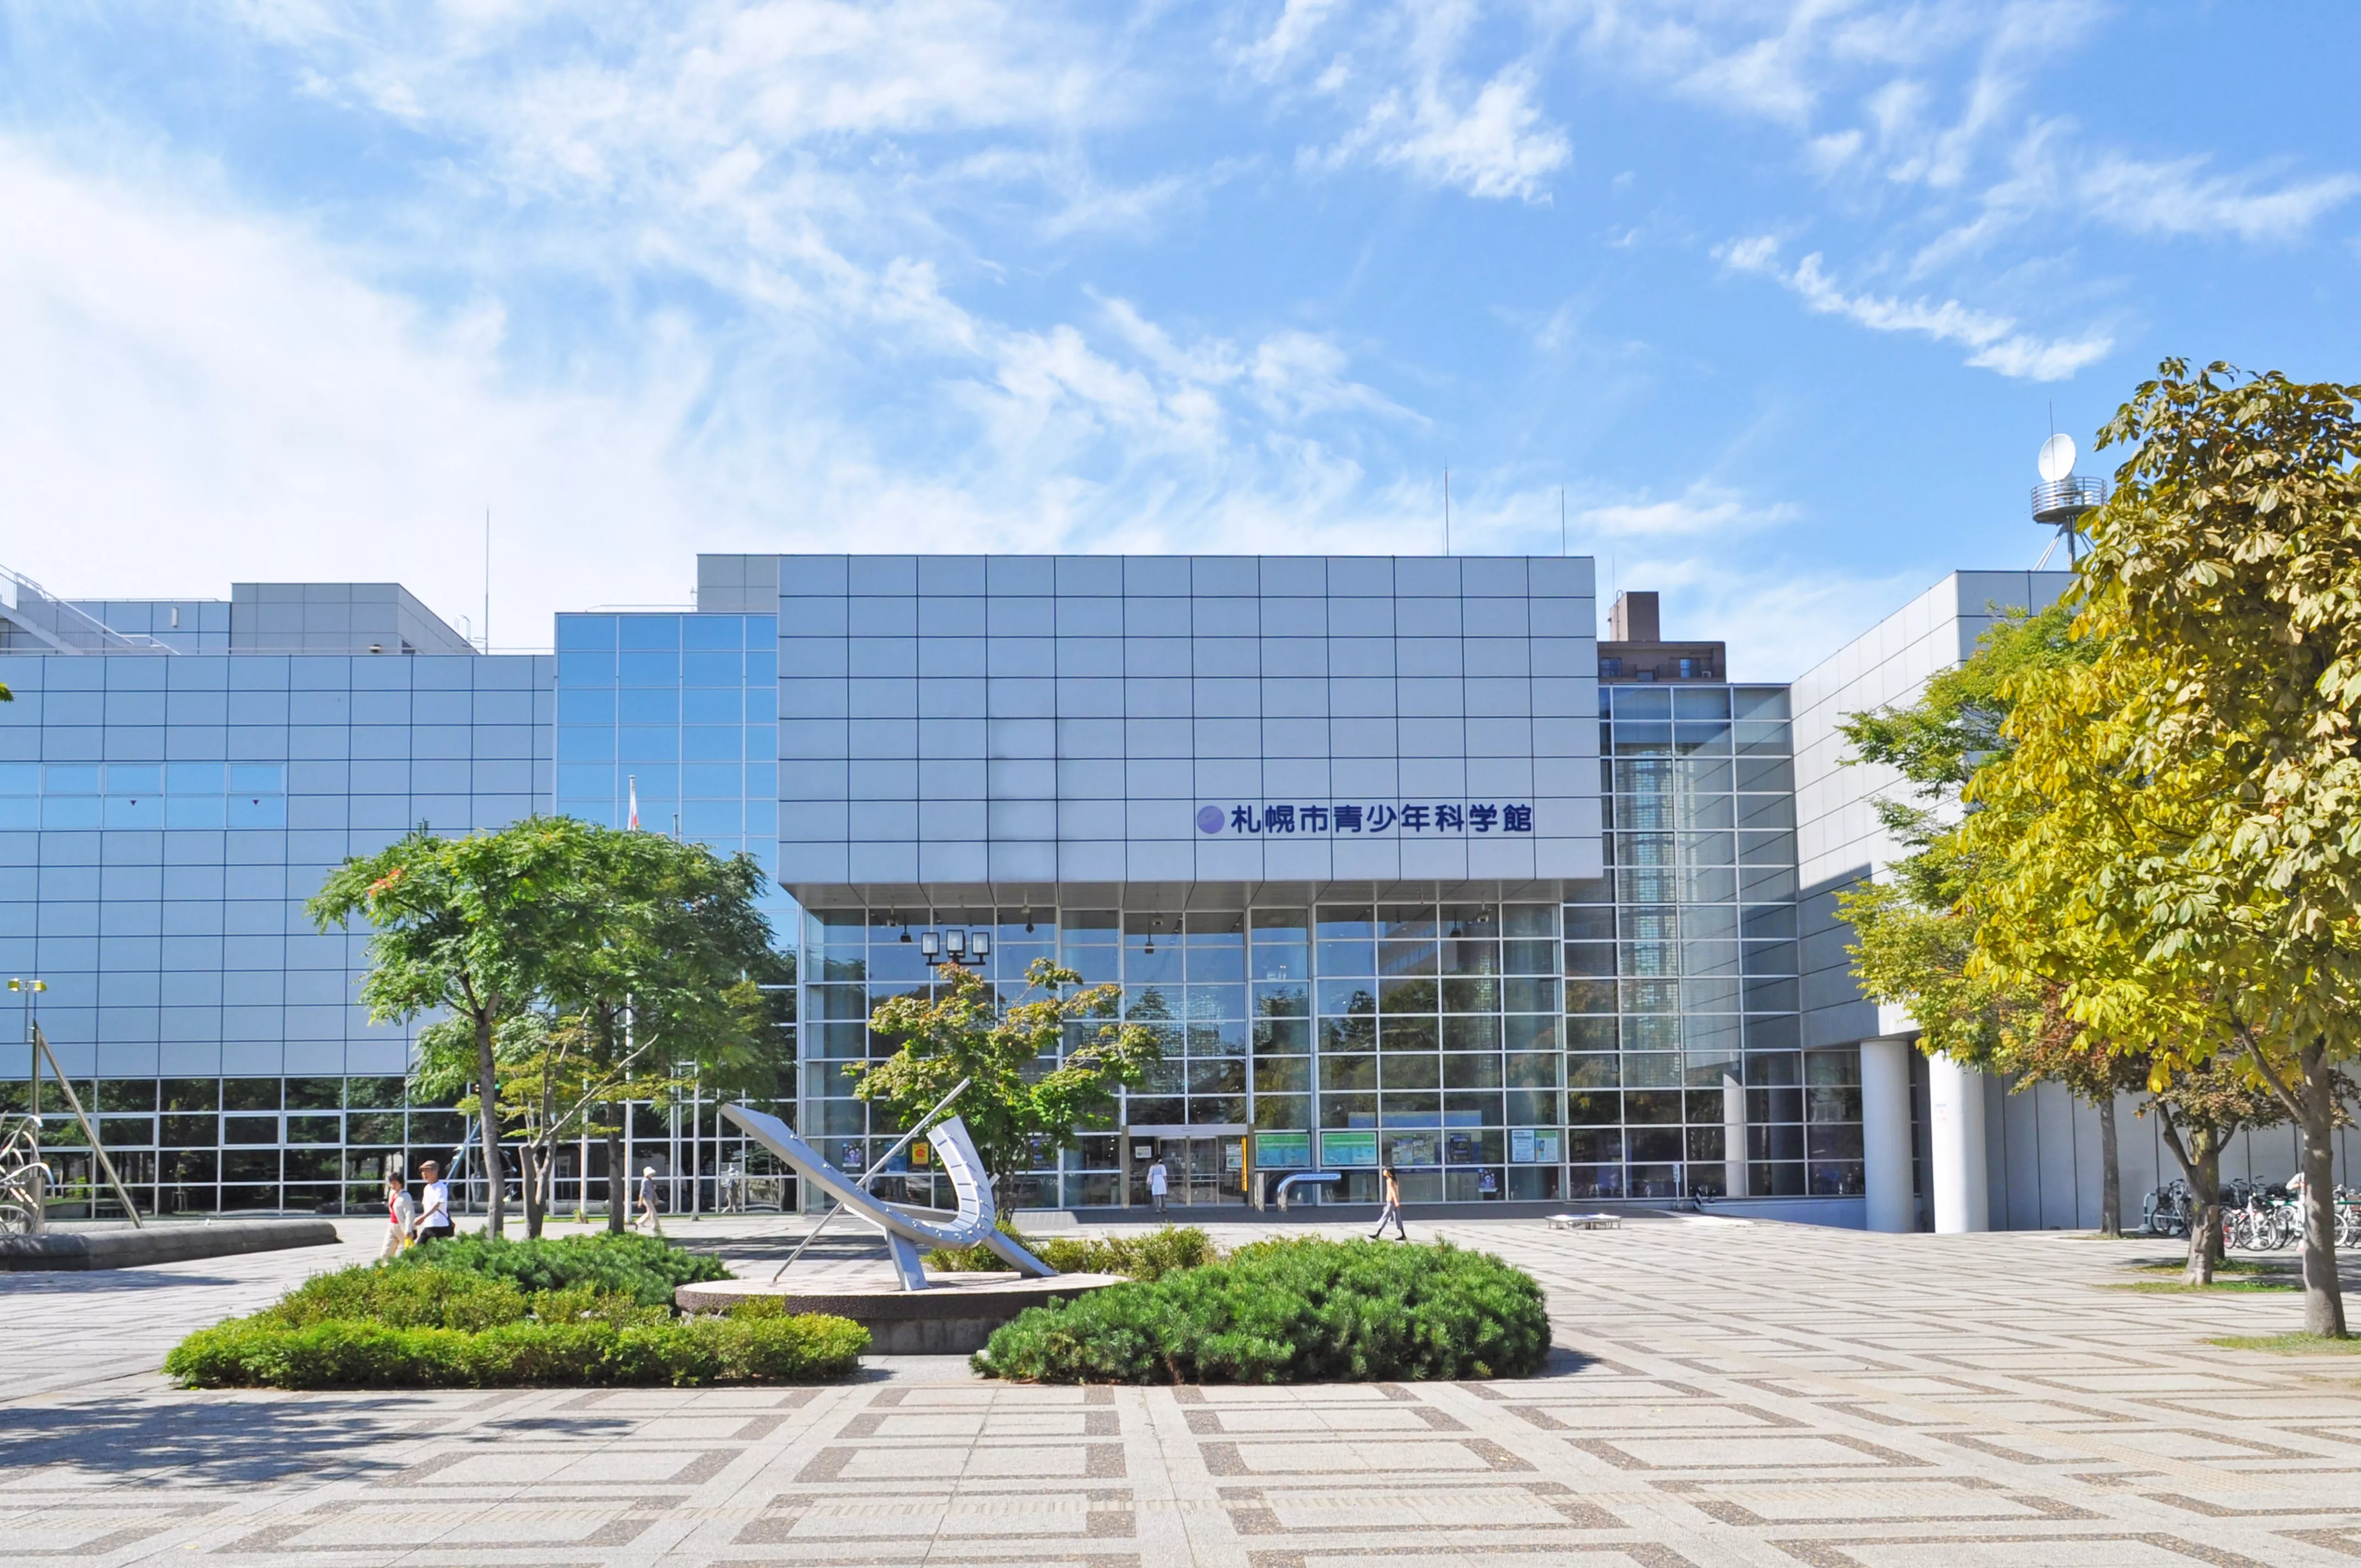 Sapporo Science Center in Japan, East Asia | Museums,Observatories & Planetariums - Rated 3.5